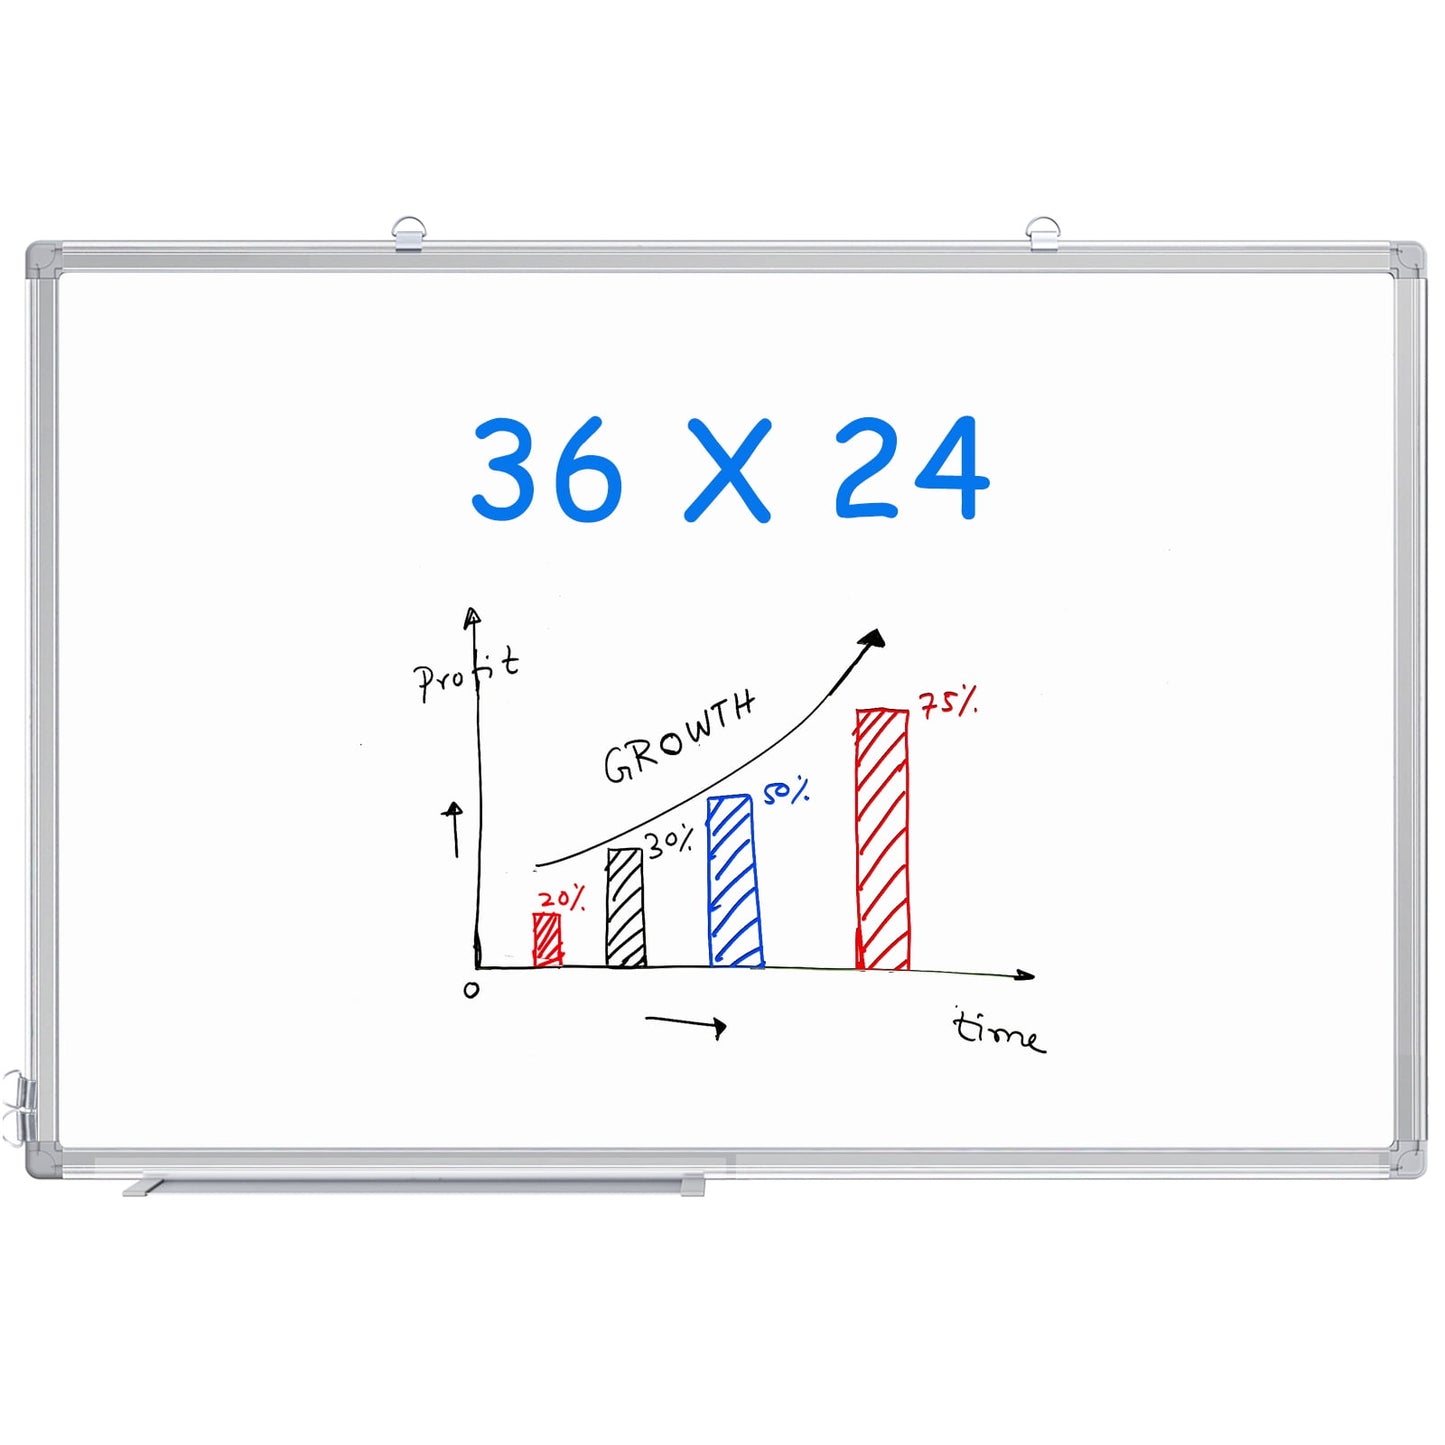 Maxtek Magnetic White Board 36 x 24 Dry Erase Board Wall Mounted,3' x 2' Marker Whiteboard with Pen Tray for School, Home, Office, Silver Aluminum Frame